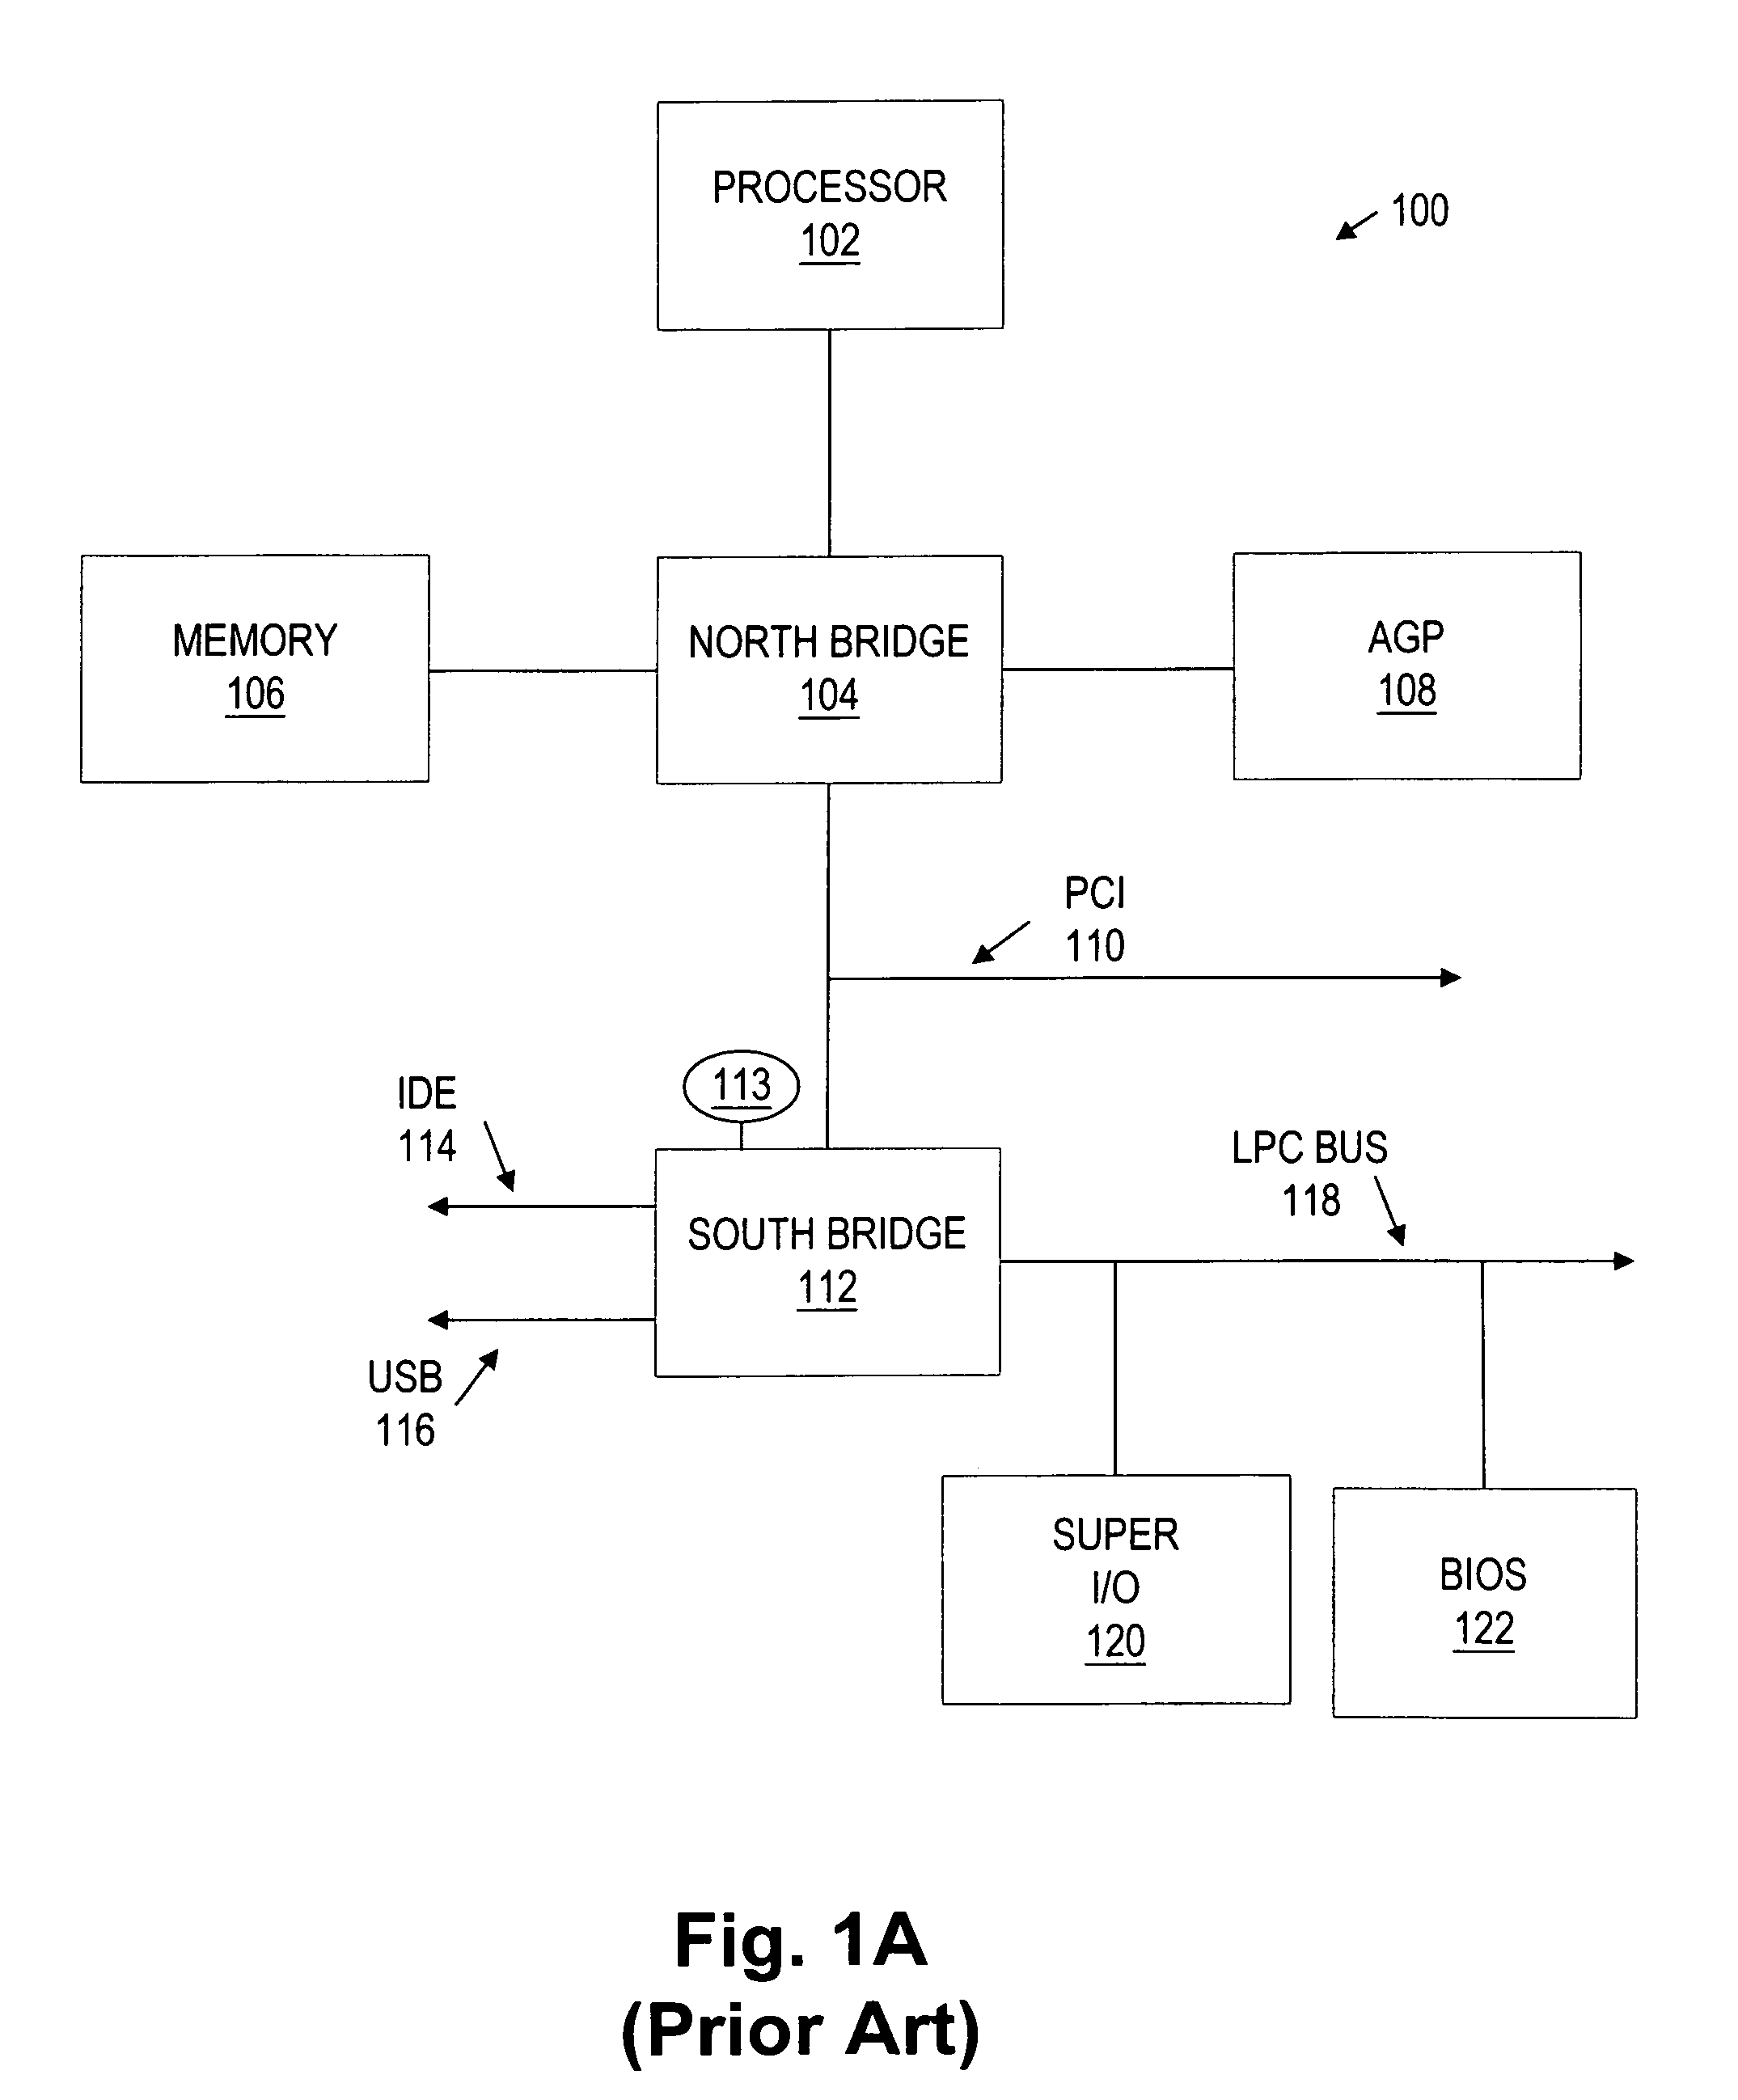 Locking mechanism override and disable for personal computer ROM access protection